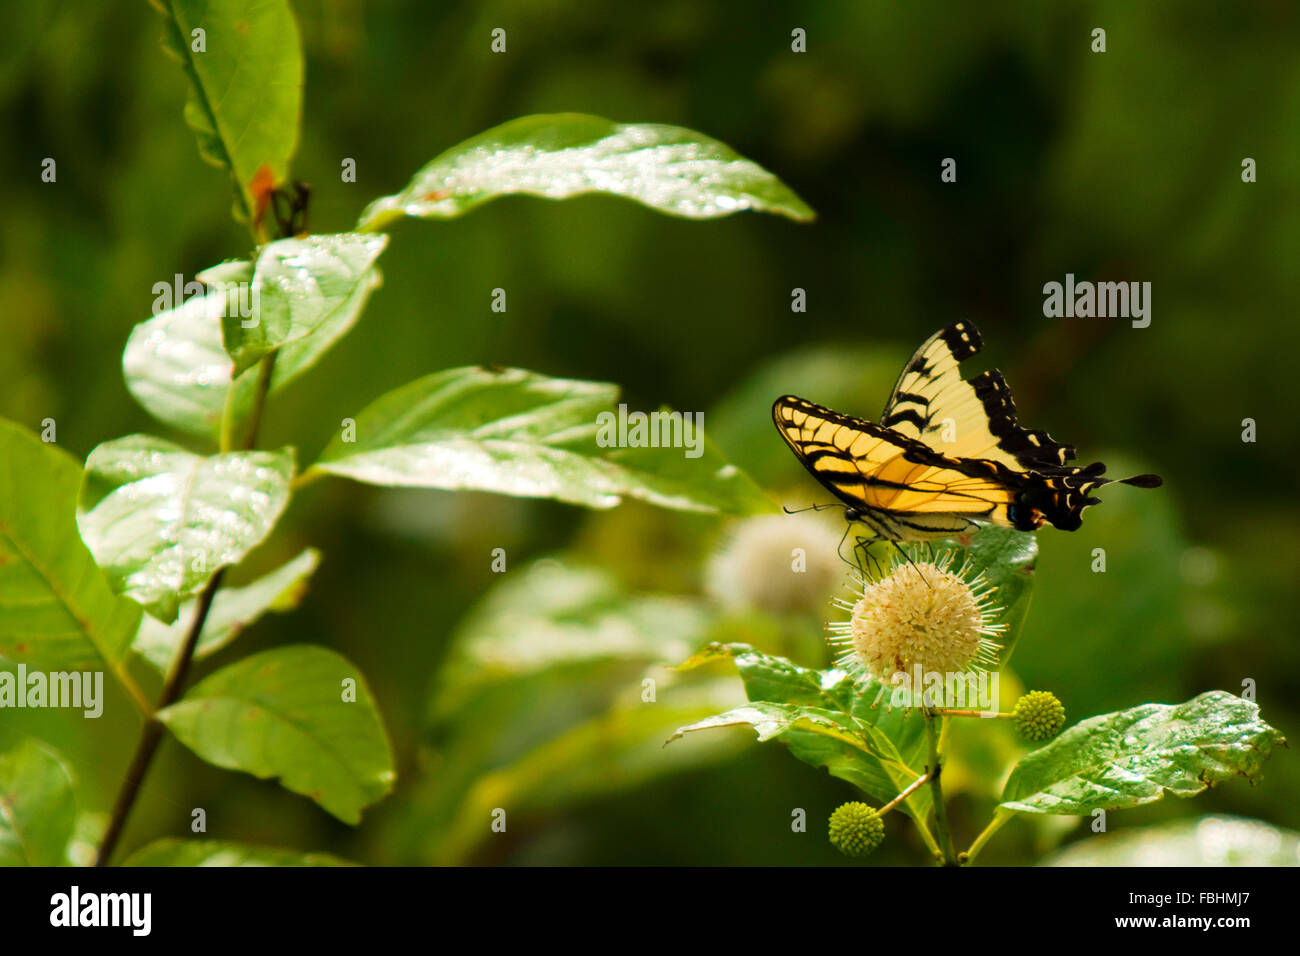 A yellow and black swallowtail butterfly sits on a buttonbush flower feeding from the nectar. Stock Photo